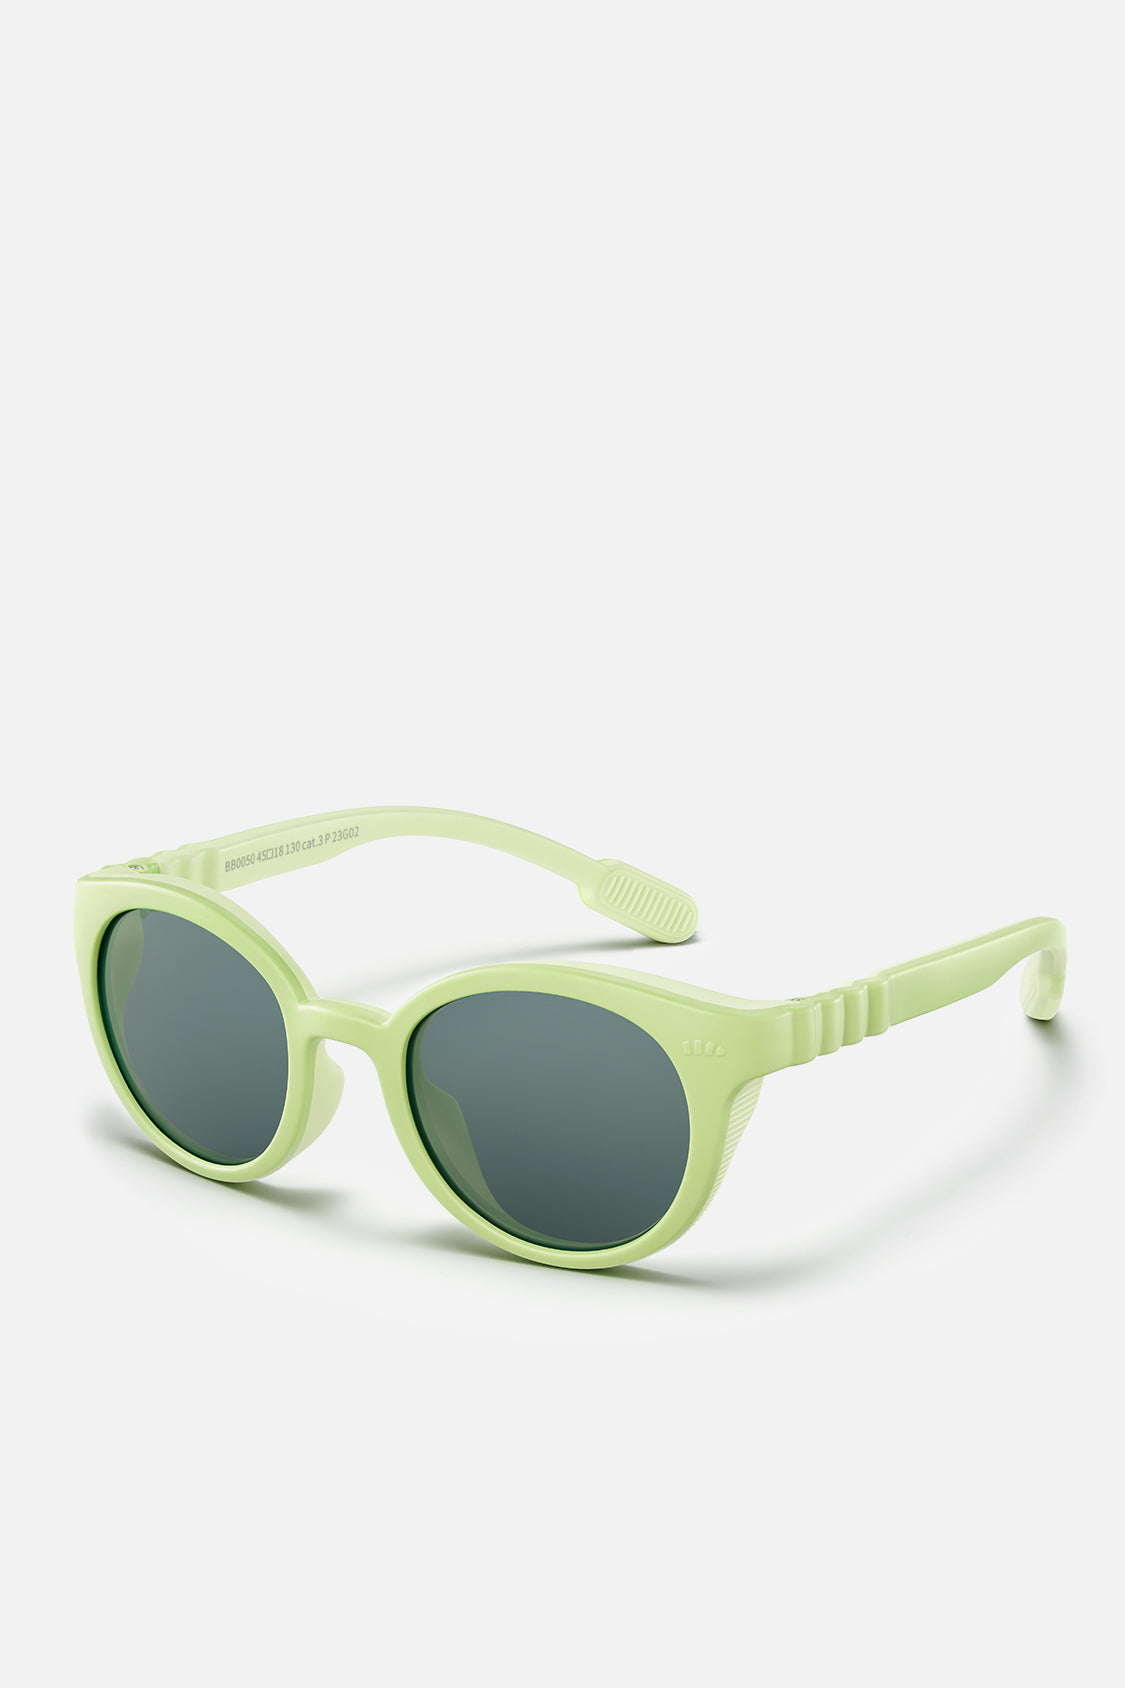 beneunder kid's protective sunglasses UV400 #color_early spring green shoots